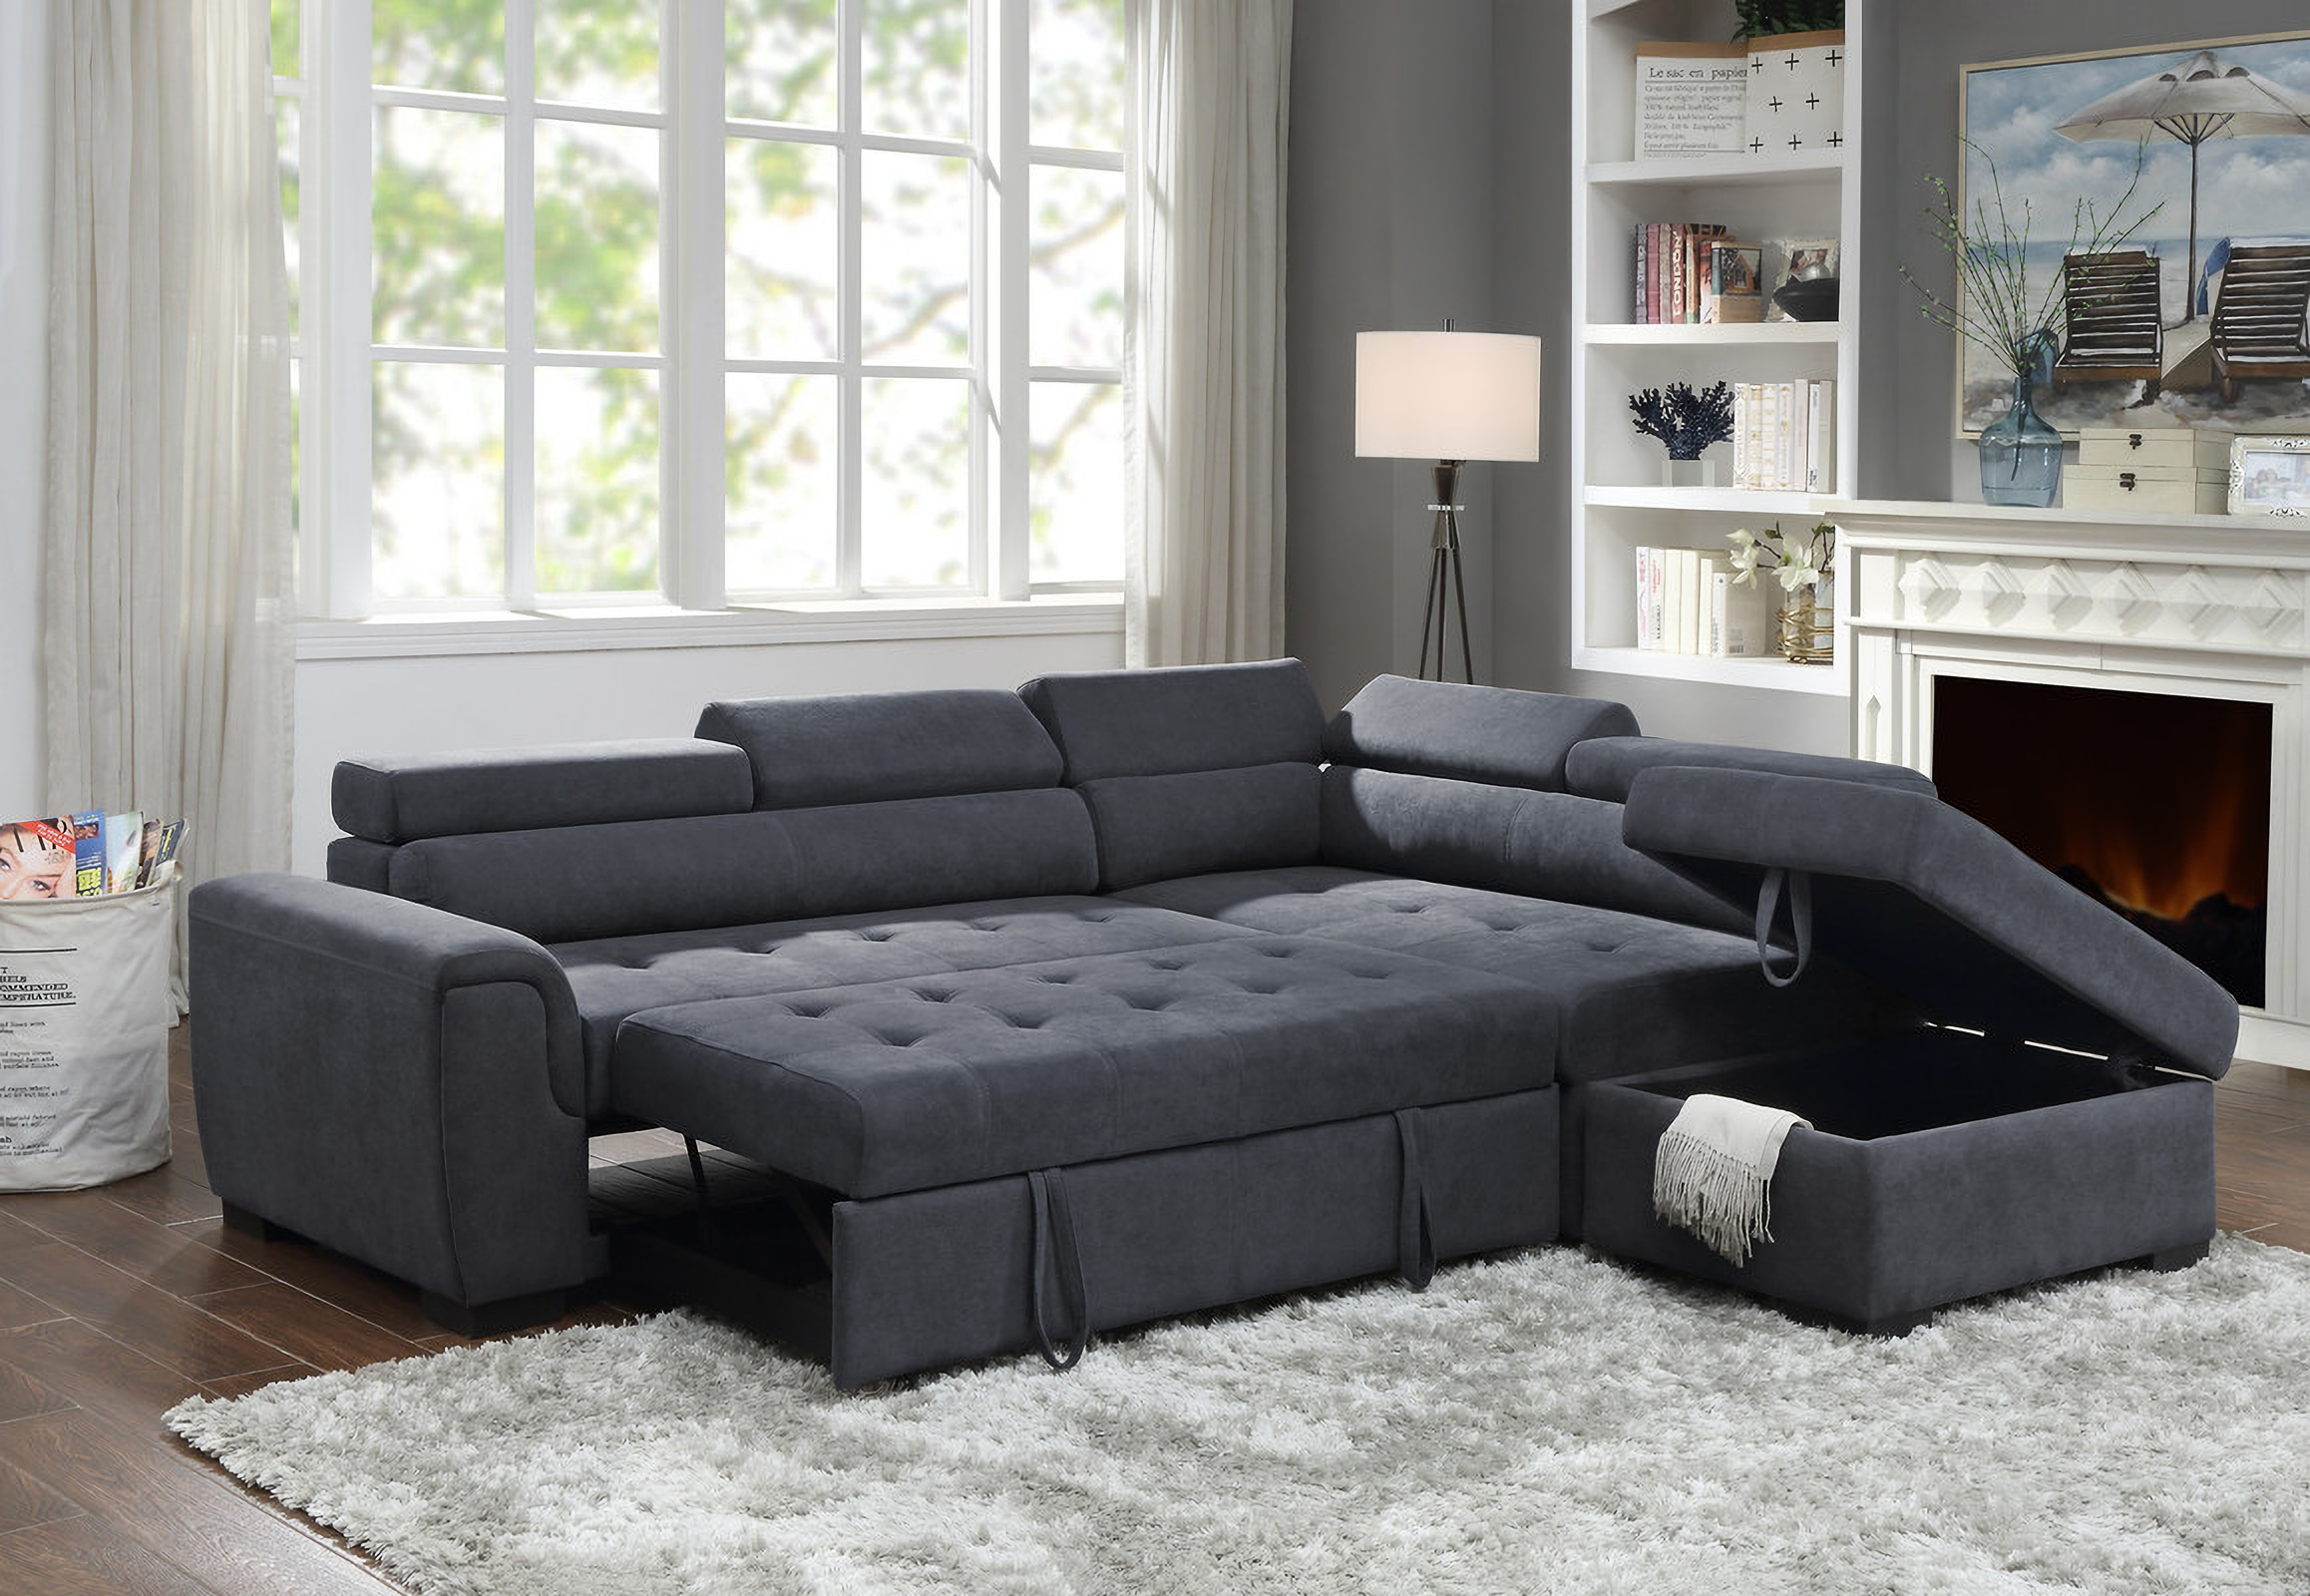 Haris Dark Gray Fabric Sleeper Sofa Sectional With Adjule Headrest And Storage Ottoman By Lilola Home 1stopbedrooms